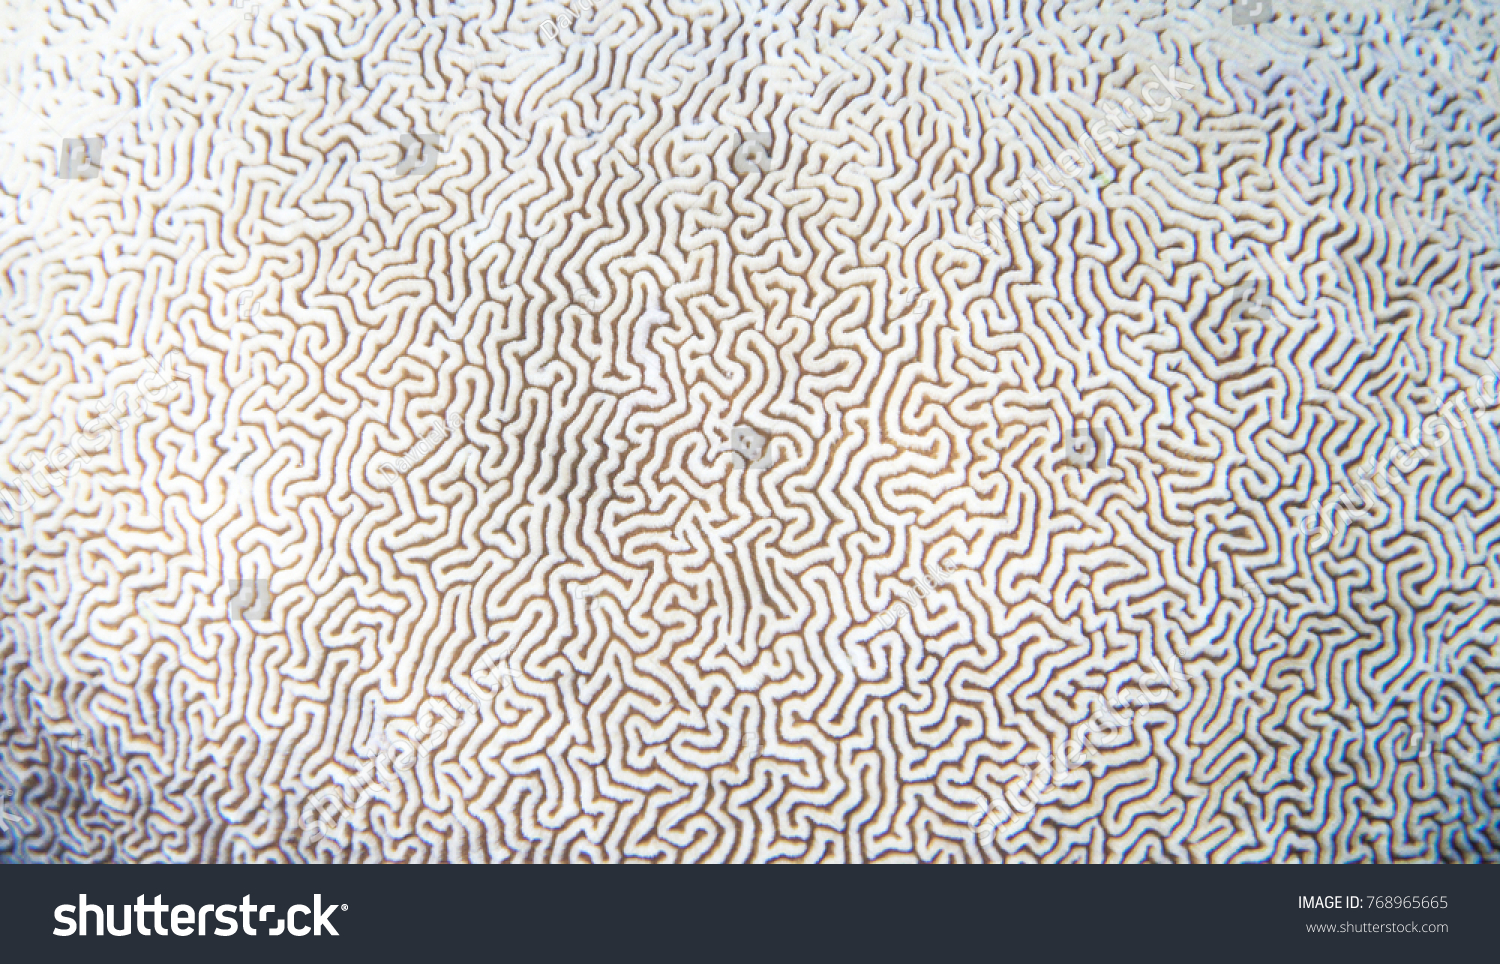 White coral texture. Tropical seashore underwater photo. Coral reef animal. Sea shore coral closeup. Natural surface closeup. Undersea view of marine life. Coral reef texture. Shallow water snorkeling #768965665